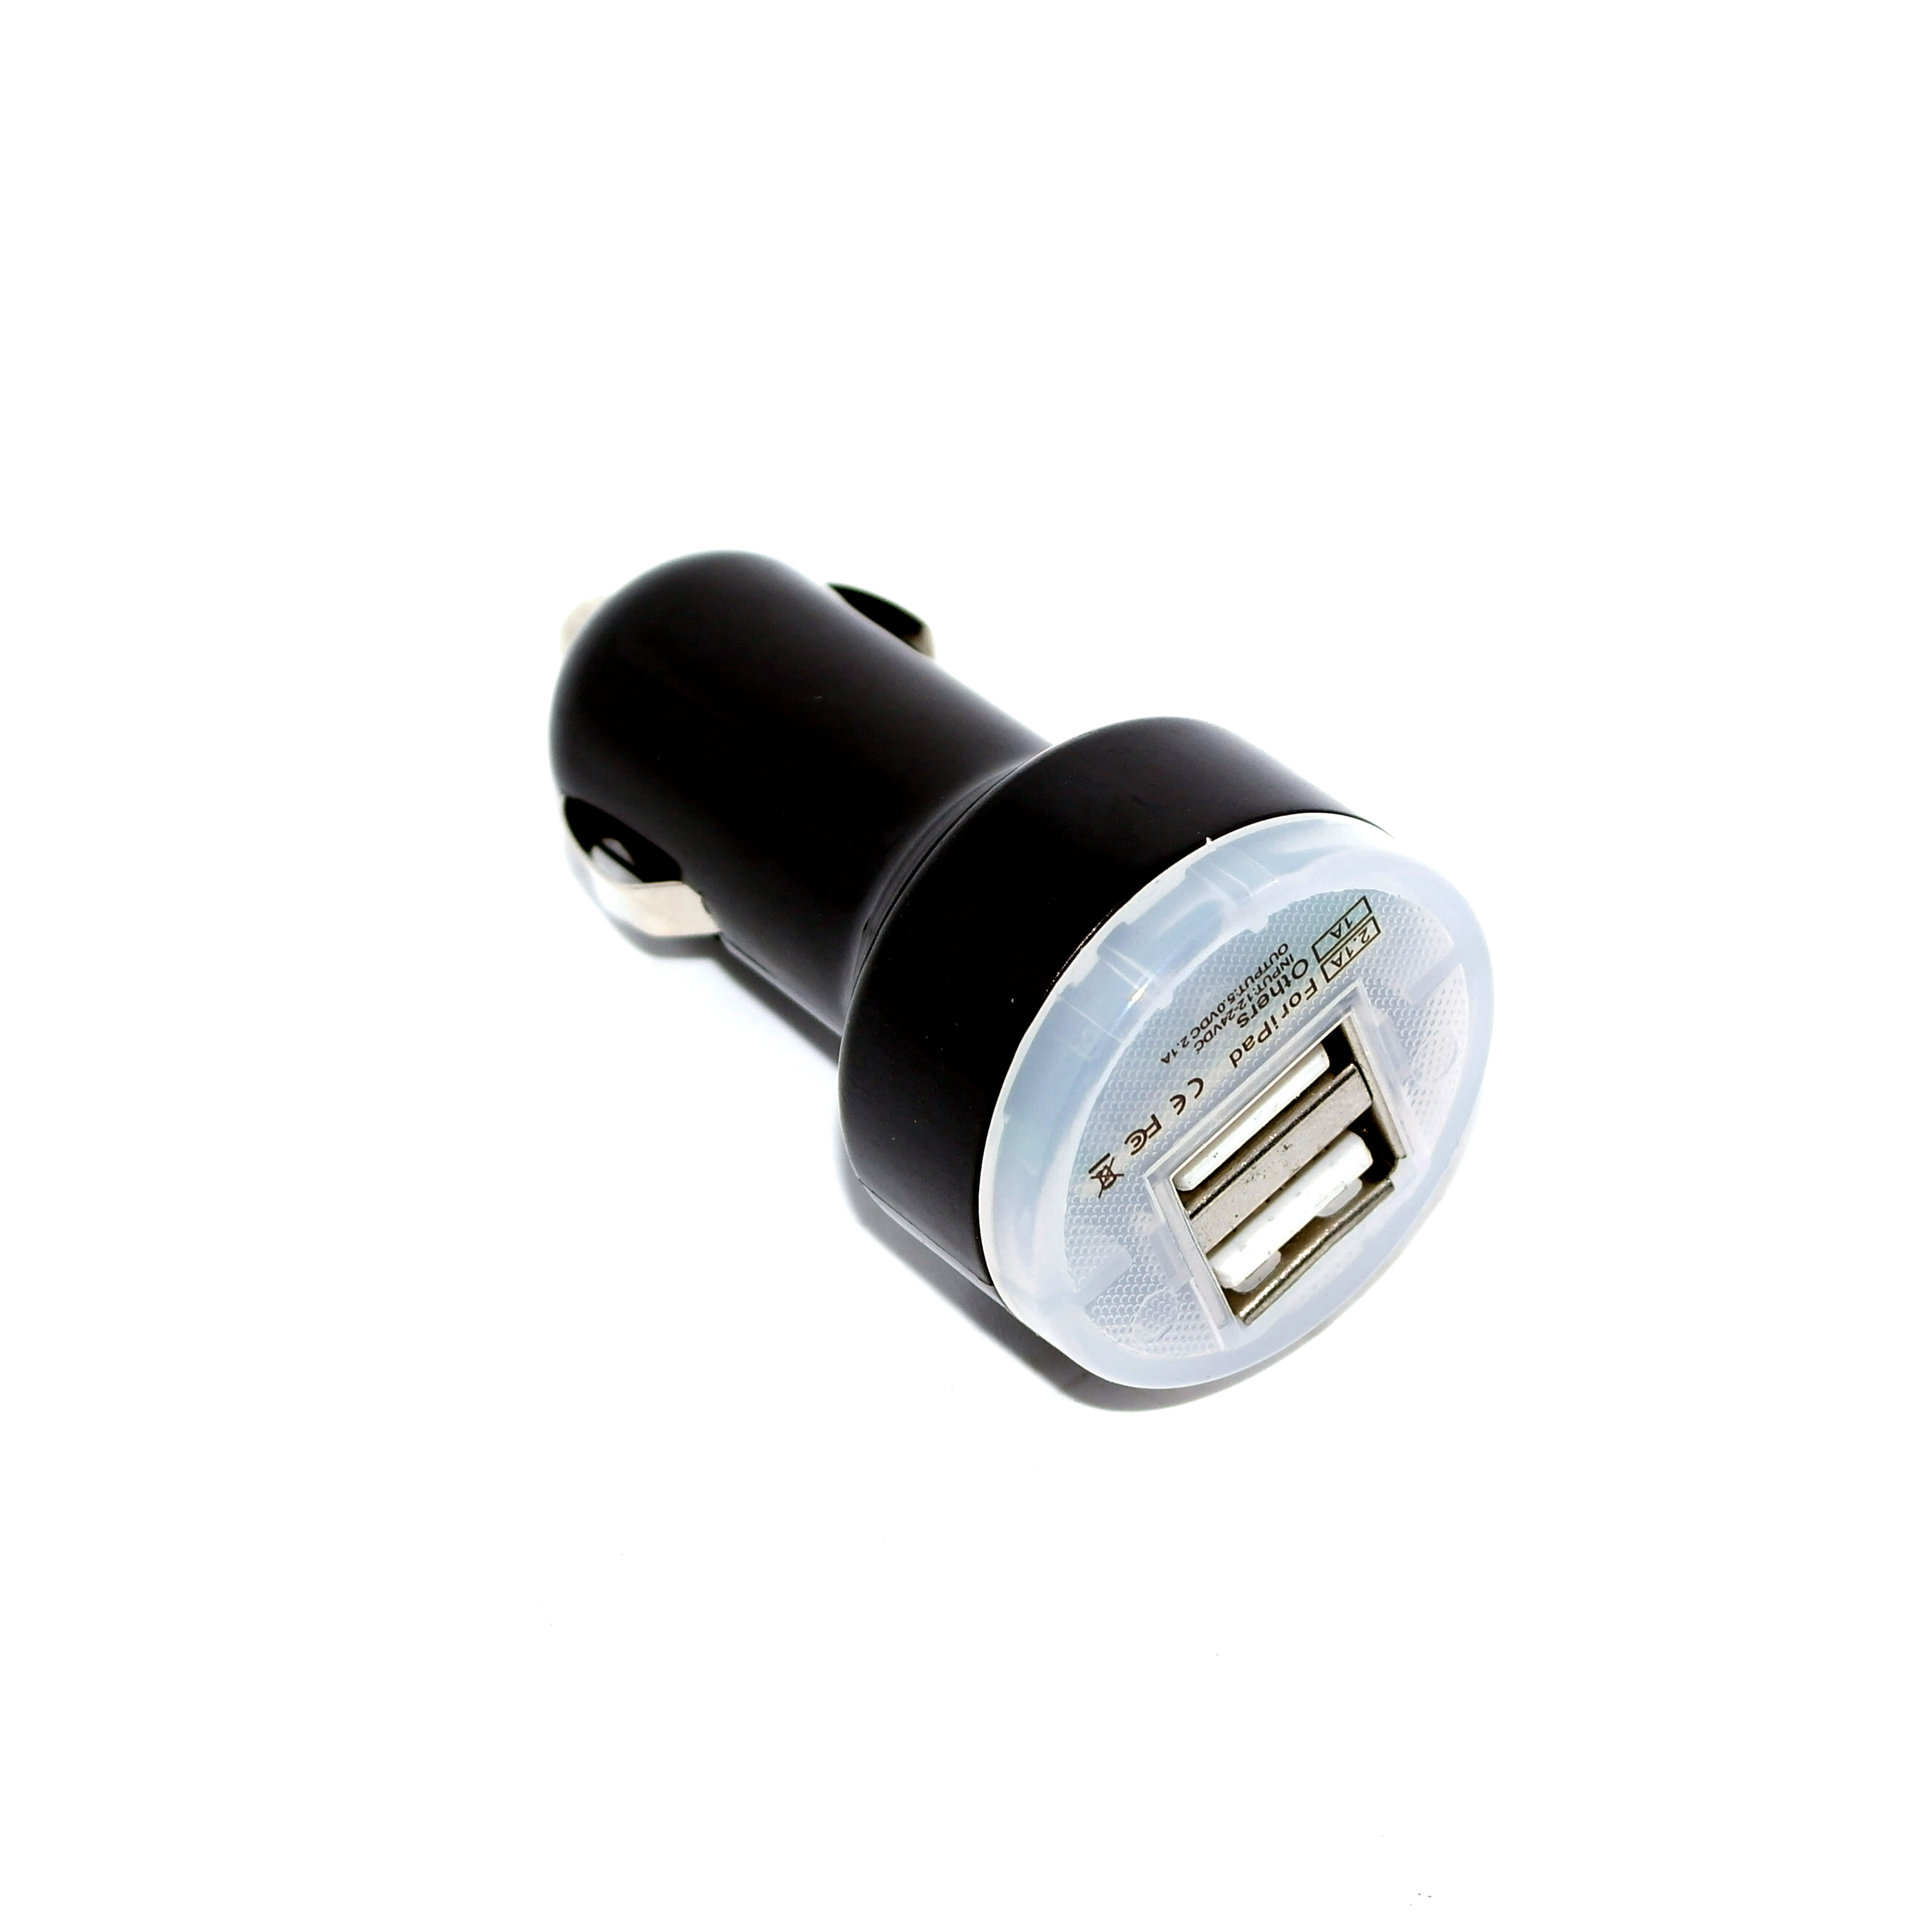 USB In-car Charger, USB charger,5v 3.1a